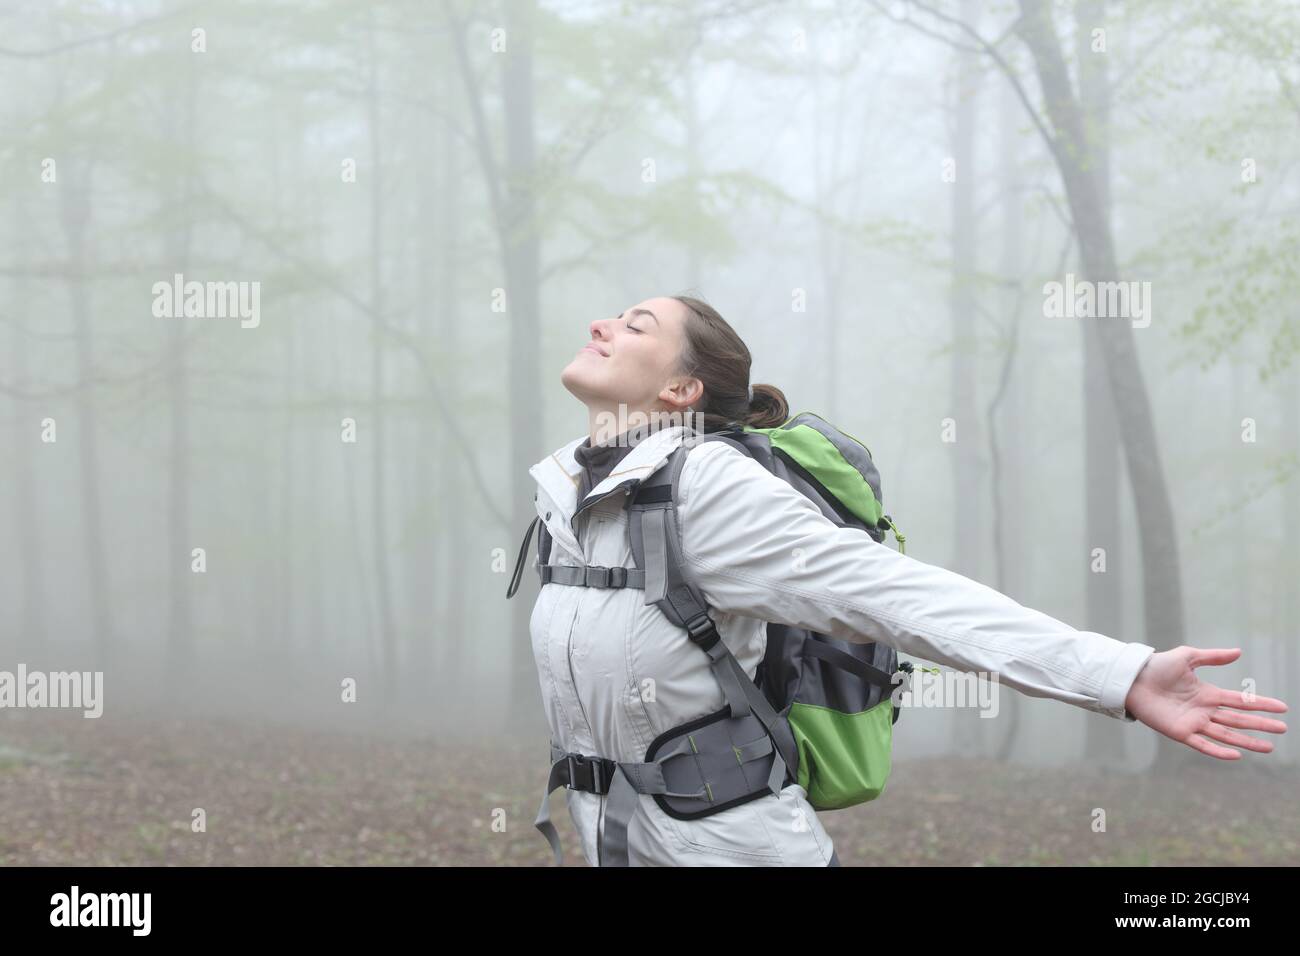 Happy trekker breathing fresh air stretching arms in a foggy day in a forest Stock Photo